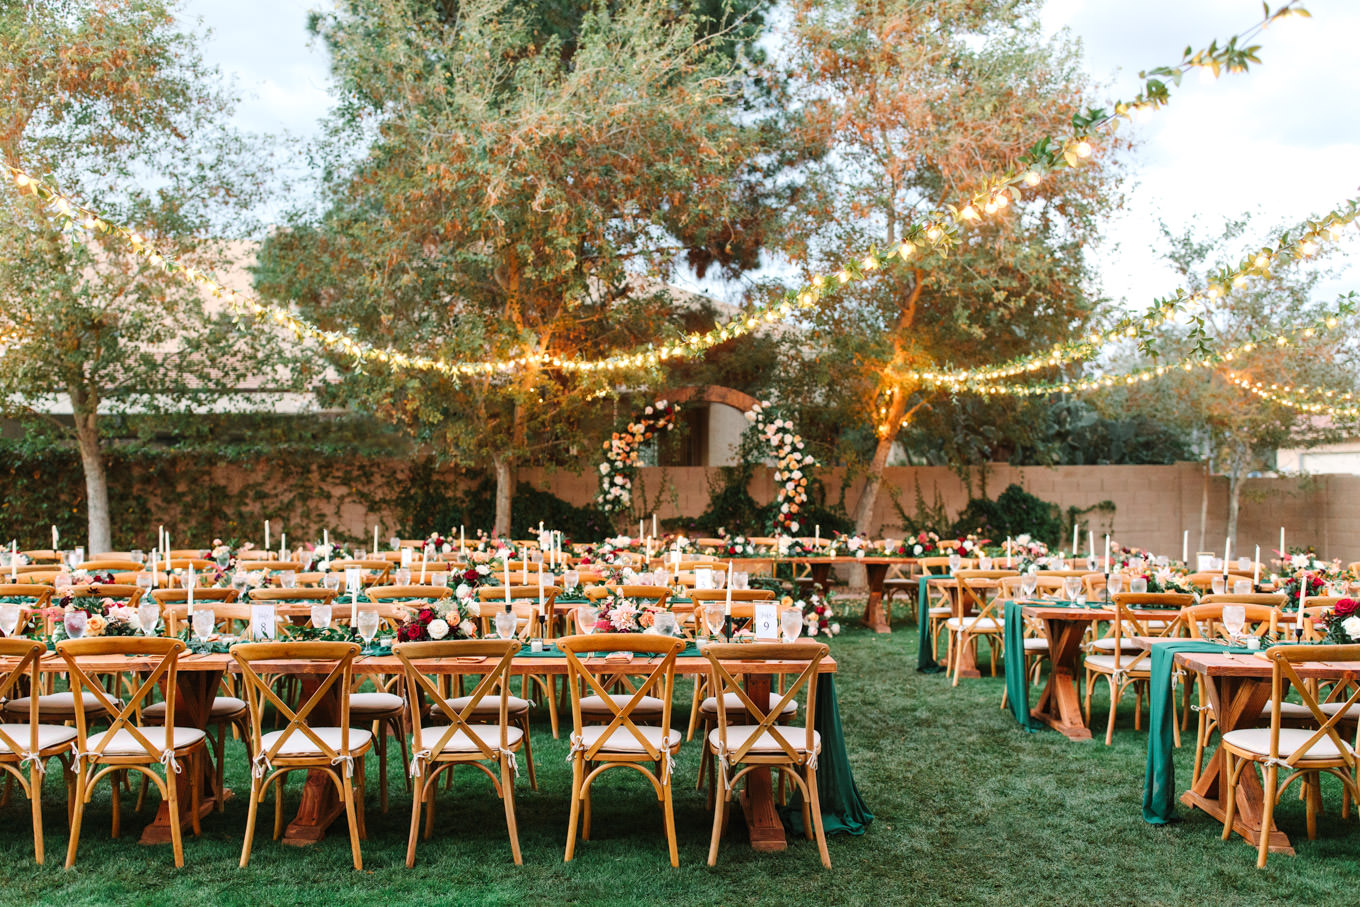 Winter backyard wedding reception with emerald and yellow | Engagement, elopement, and wedding photography roundup of Mary Costa’s favorite images from 2020 | Colorful and elevated photography for fun-loving couples in Southern California | #2020wedding #elopement #weddingphoto #weddingphotography   Source: Mary Costa Photography | Los Angeles